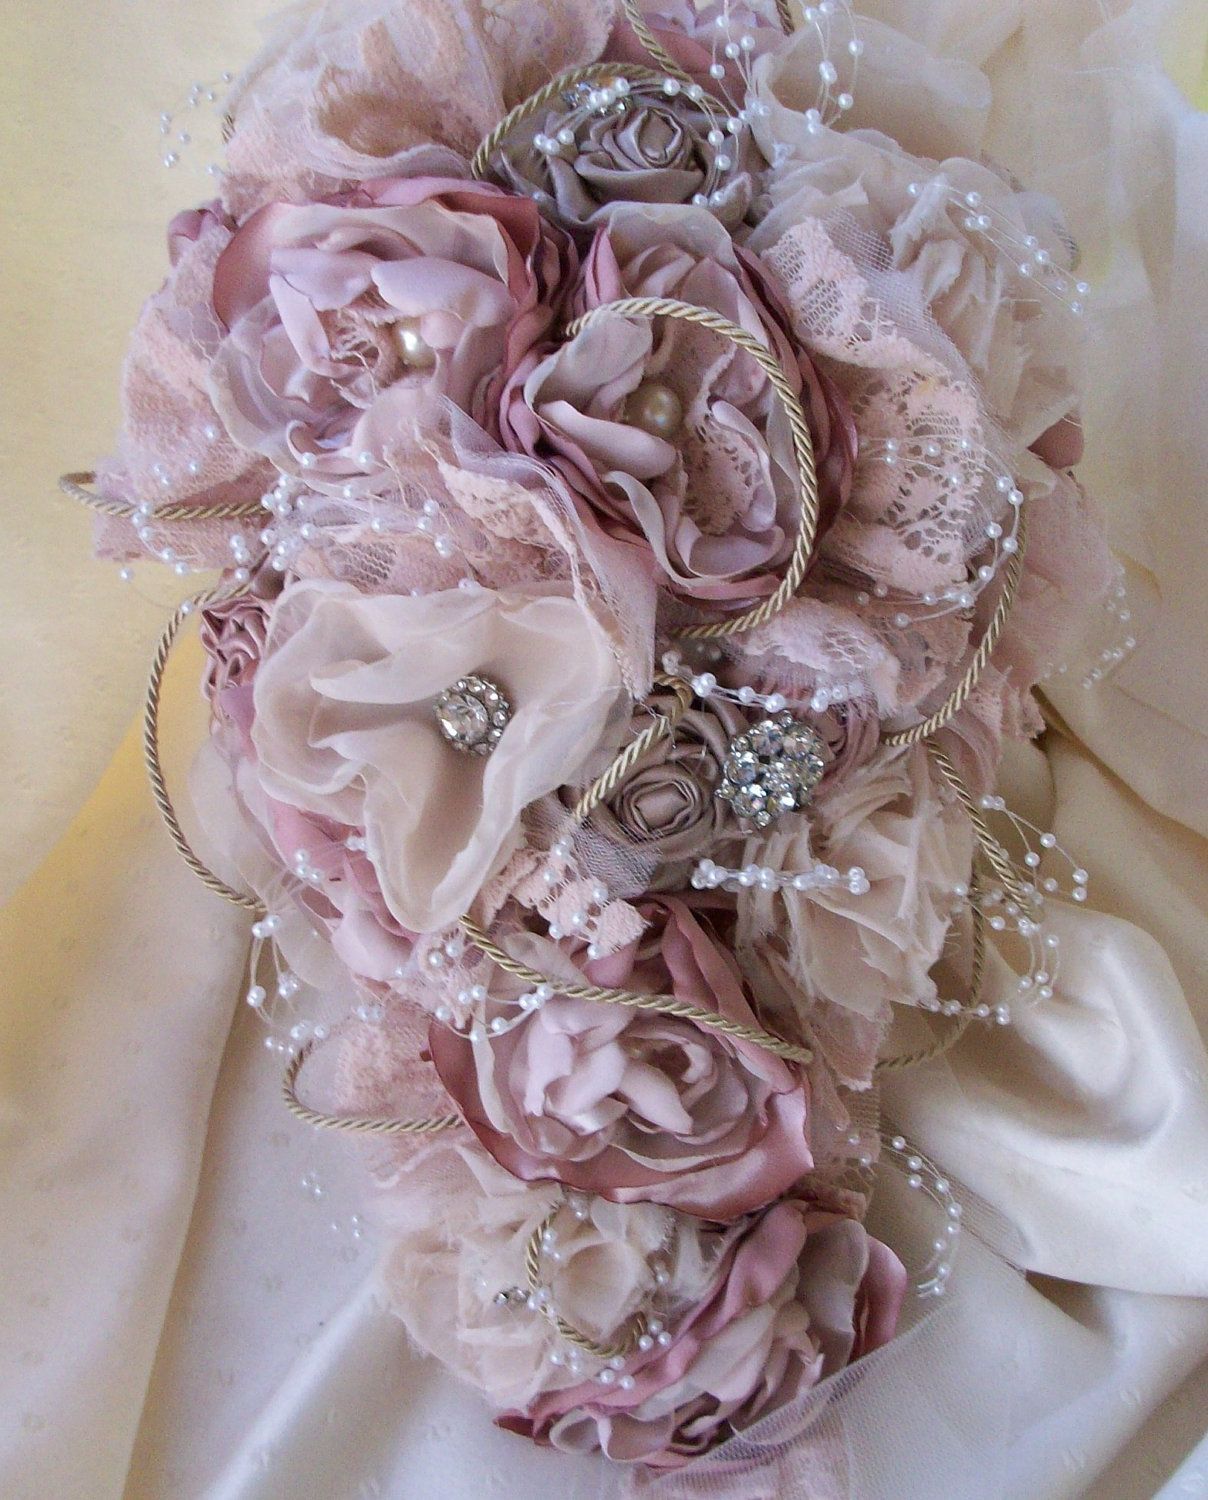 Vintage Inspired Shabby Chic Fabric Wedding Bouquet/ Bridal Bouquet with Pearls